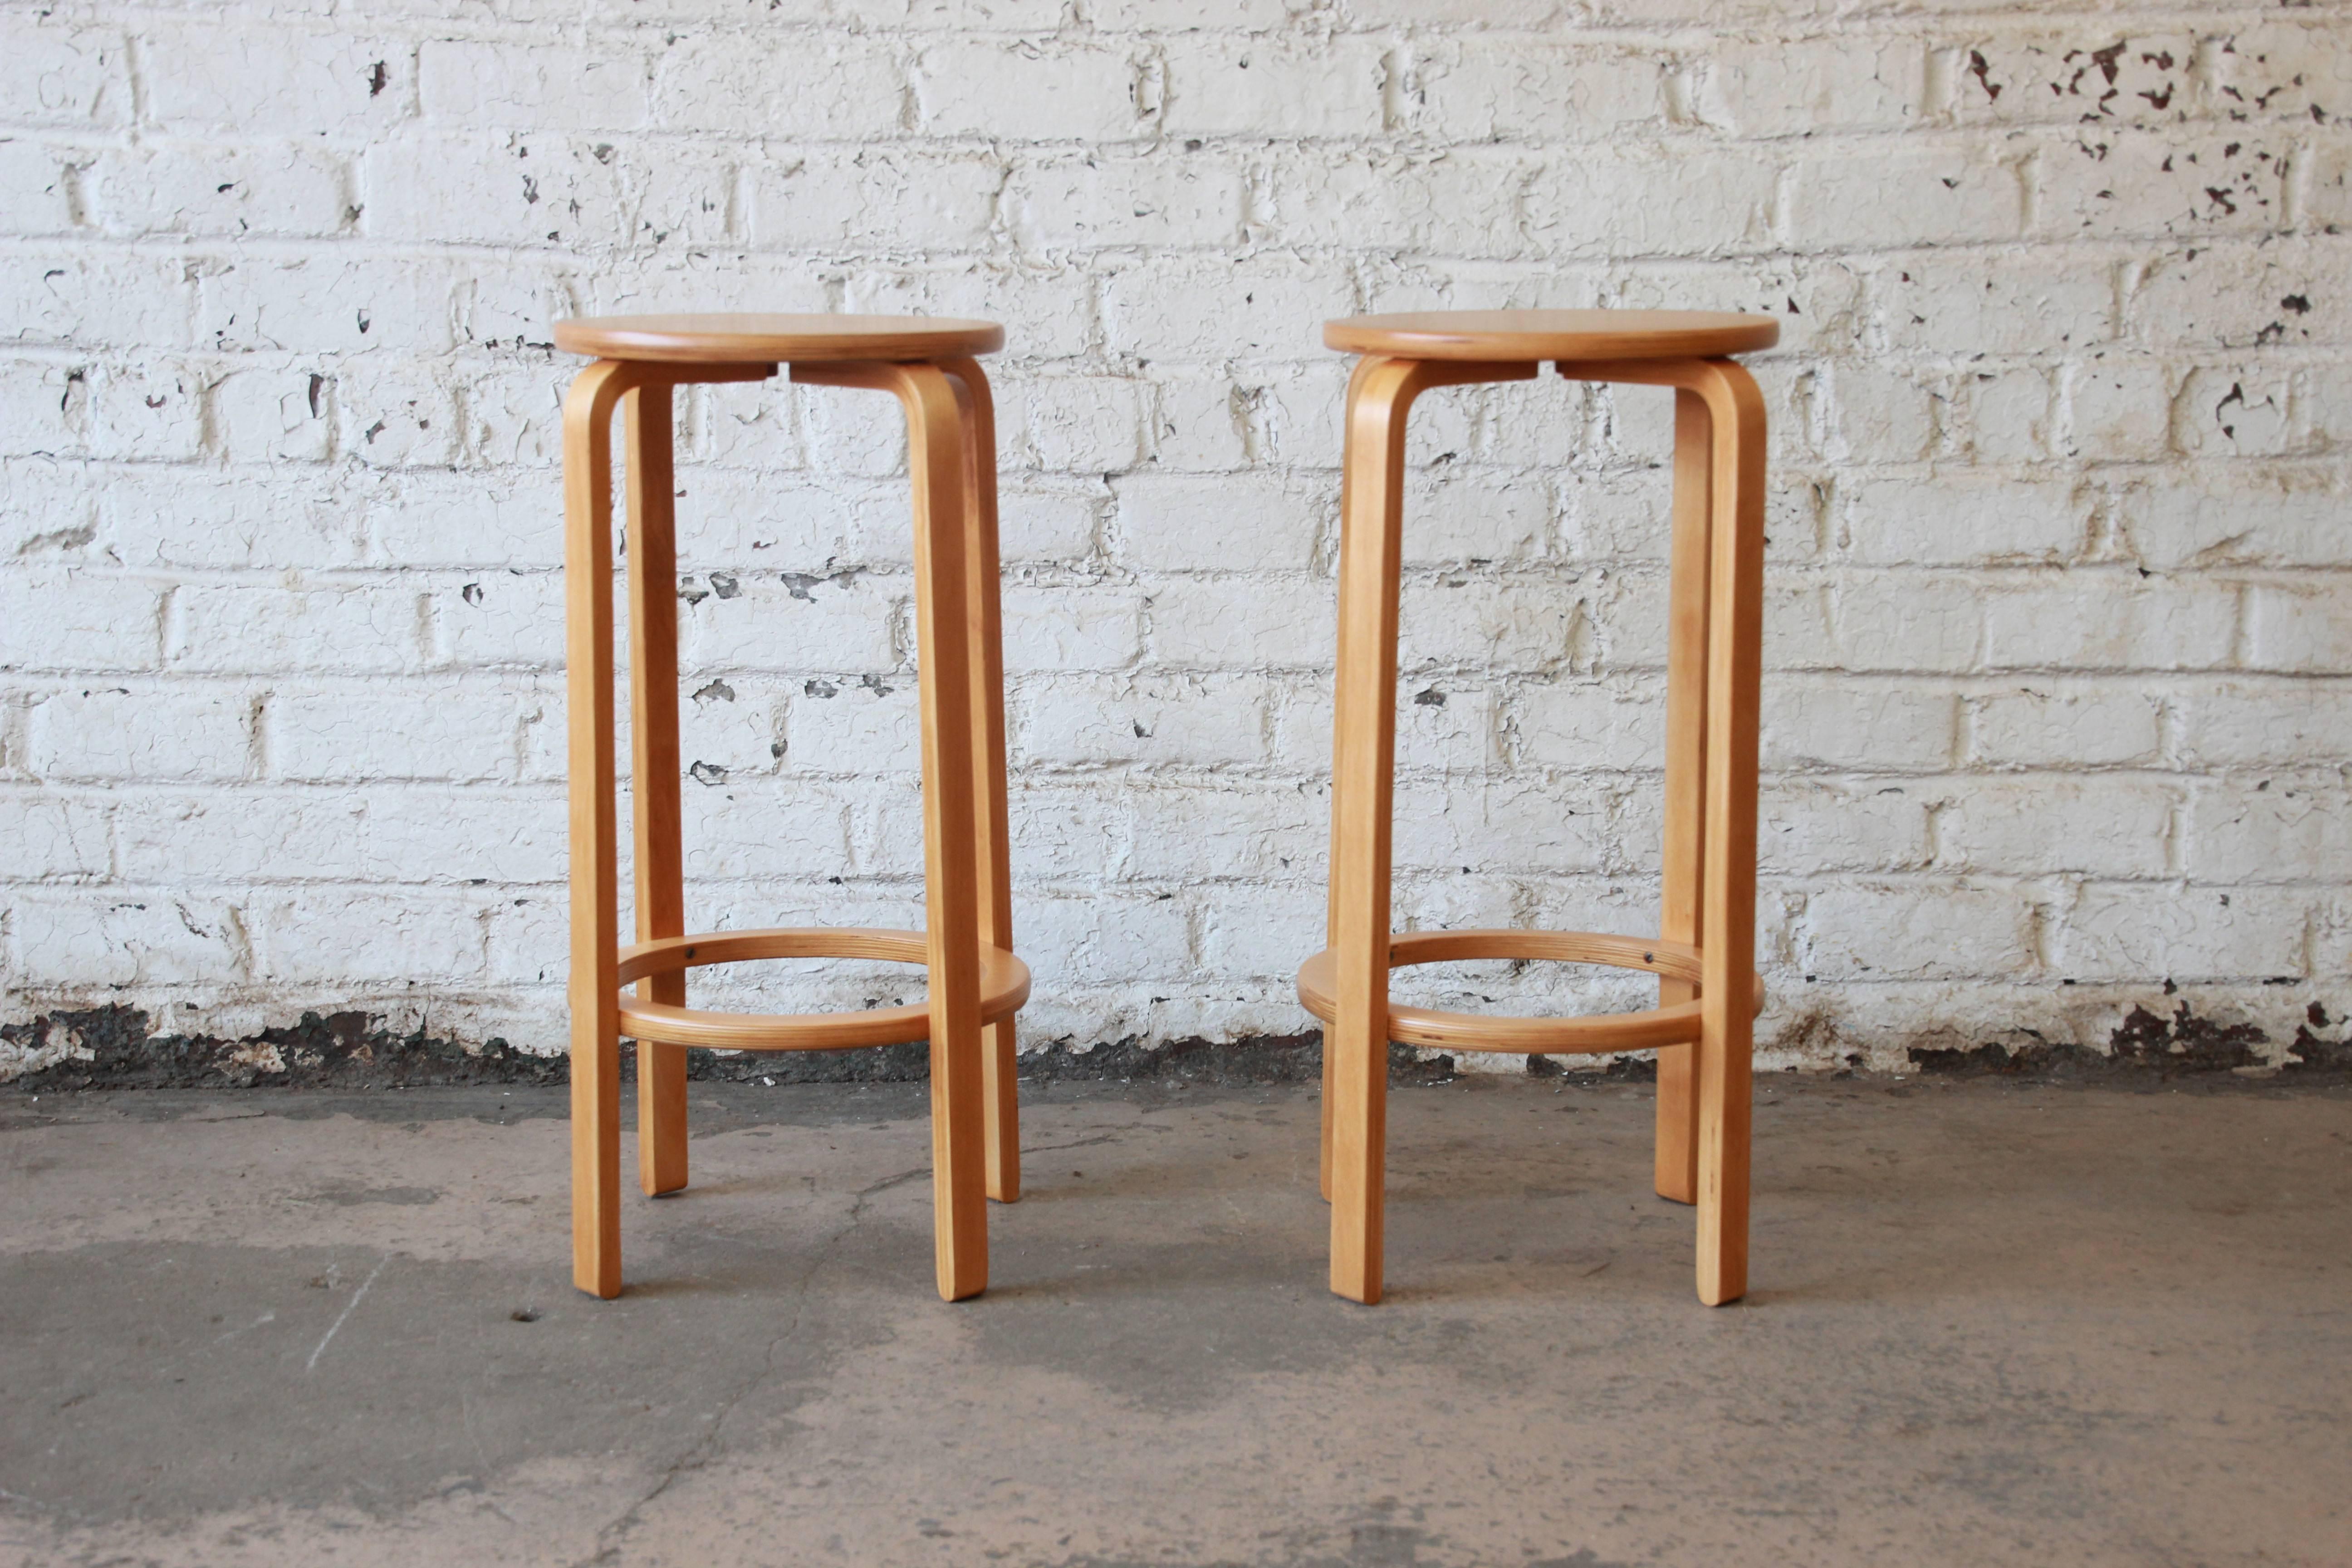 A gorgeous pair of model 64 bent birch wood bar stools designed in 1935 by iconic designer Alvar Aalto for Artek. The stools feature Aalto's signature bentwood design with sleek, Minimalist lines. They are sturdy and well-constructed. The stools